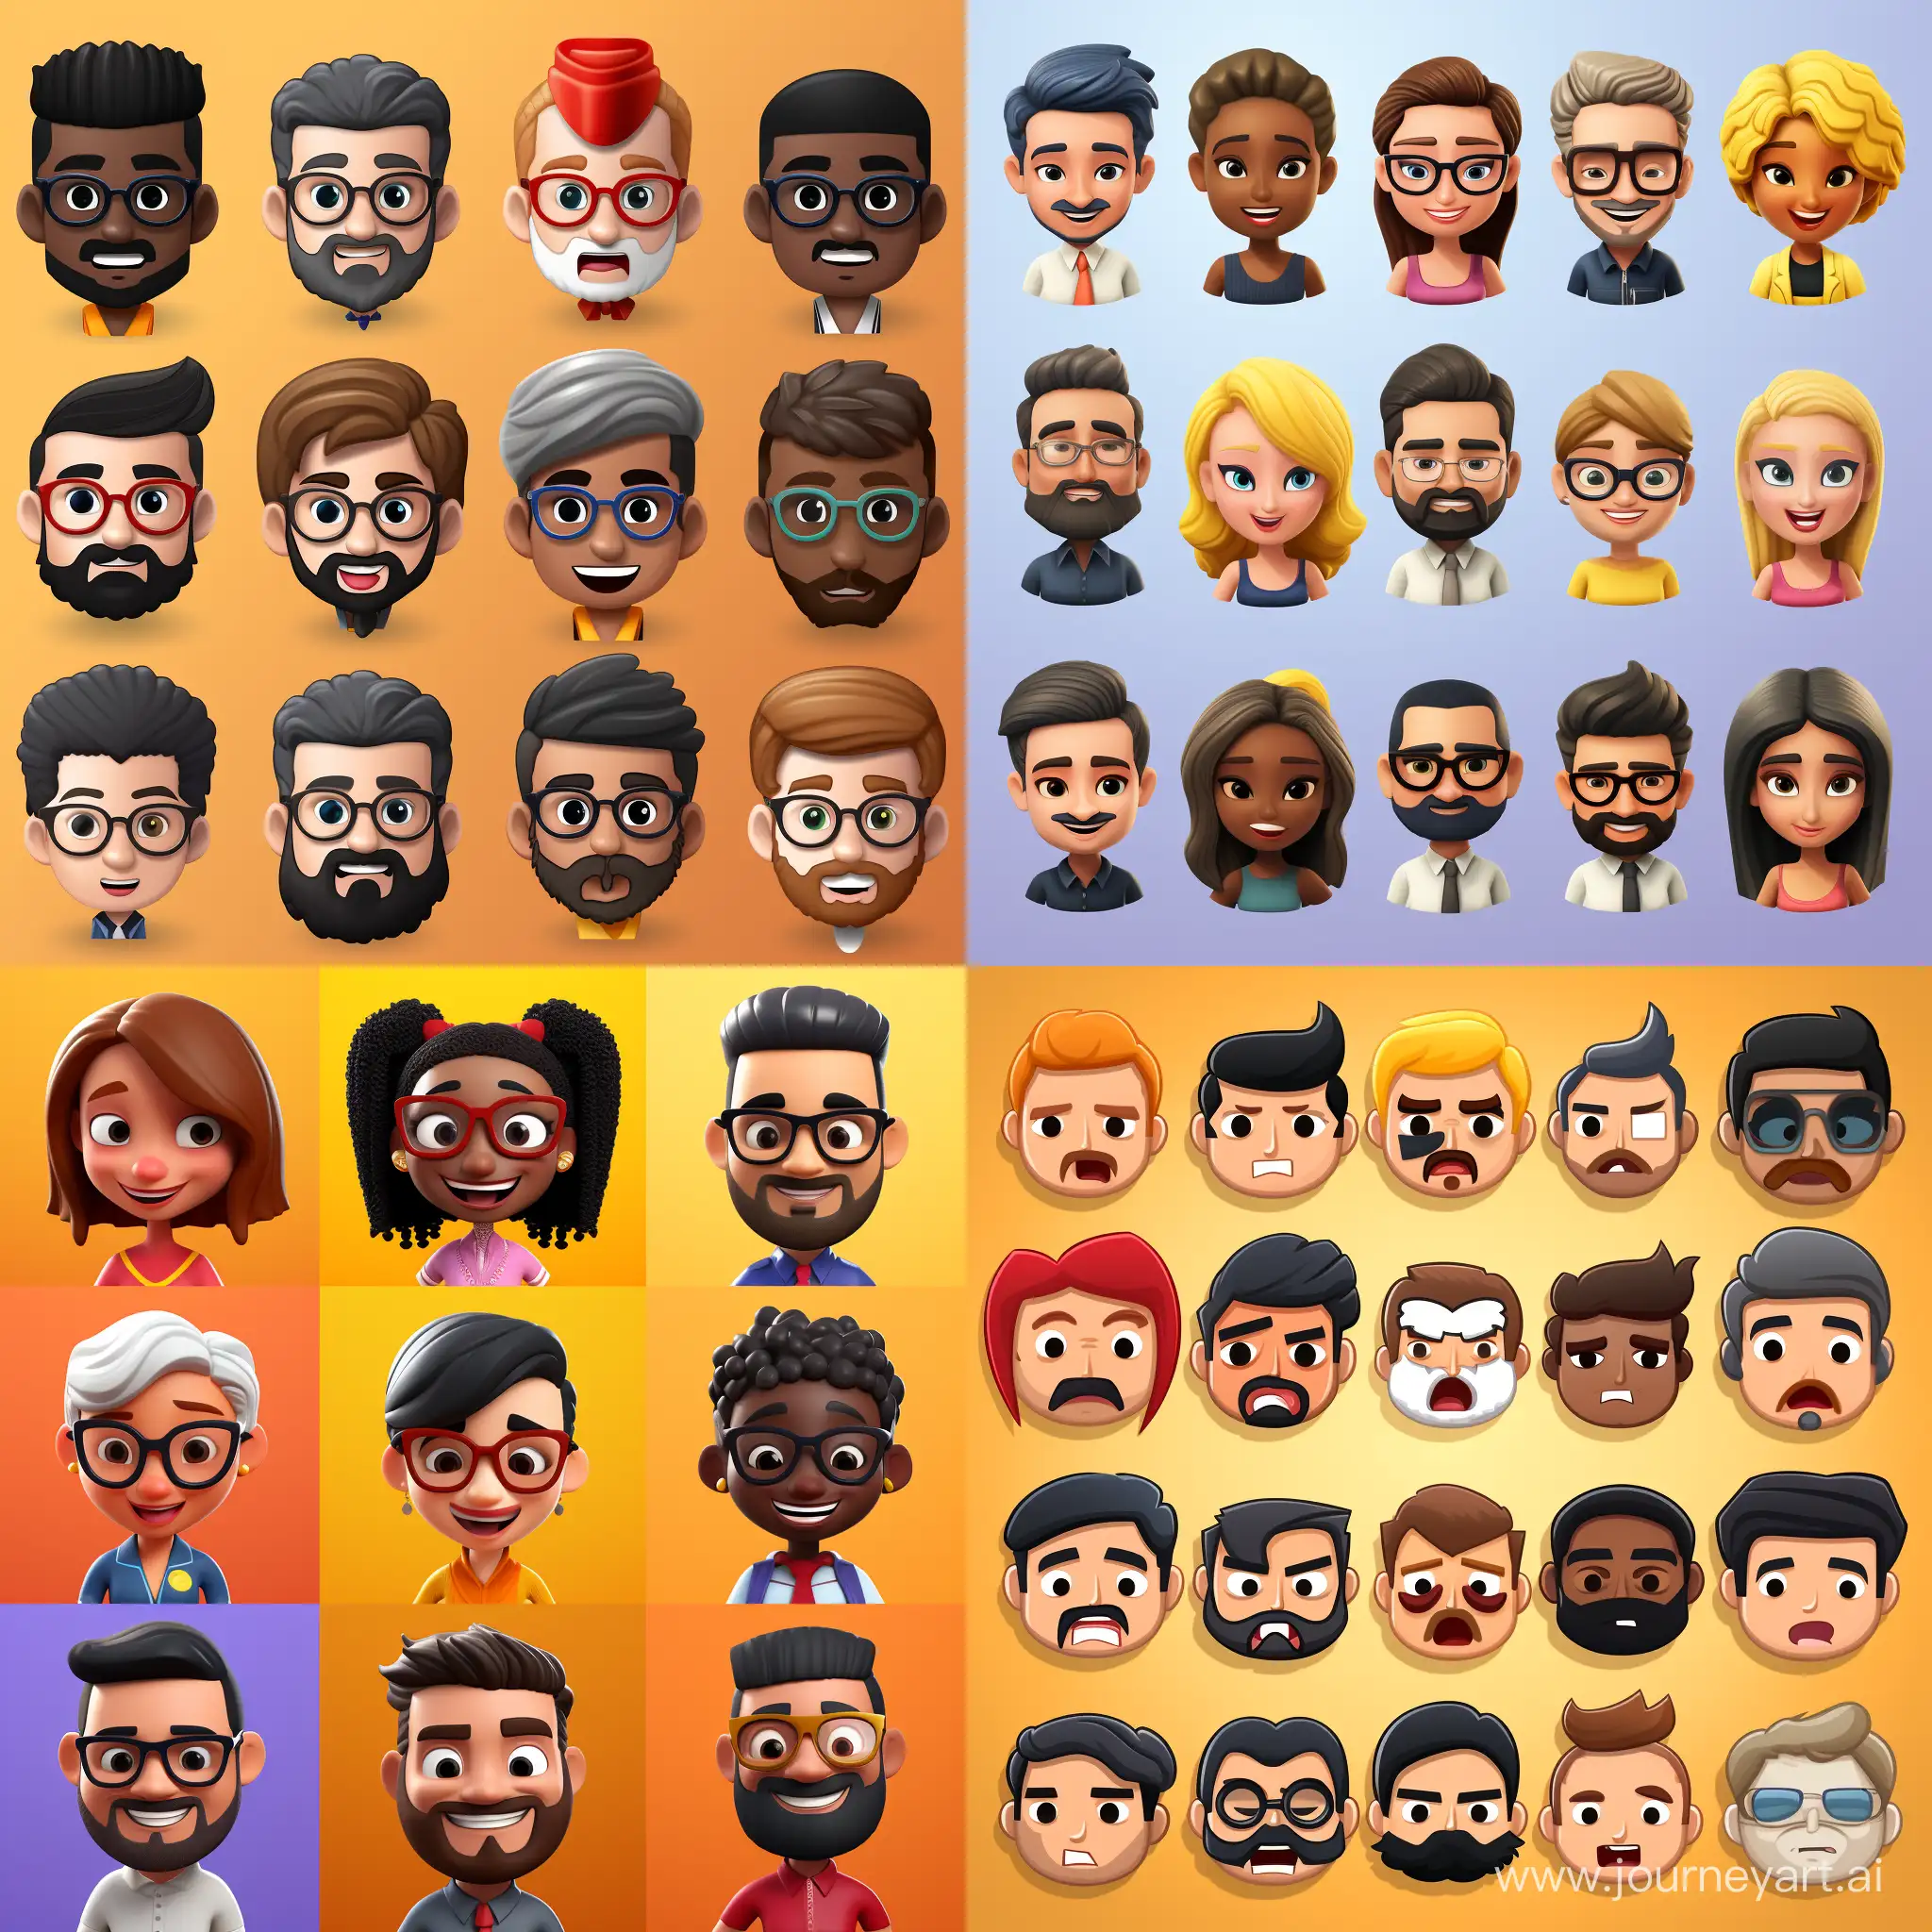 Custom-Emoji-Pack-Creation-Diverse-Character-Expressions-in-11-Aspect-Ratio